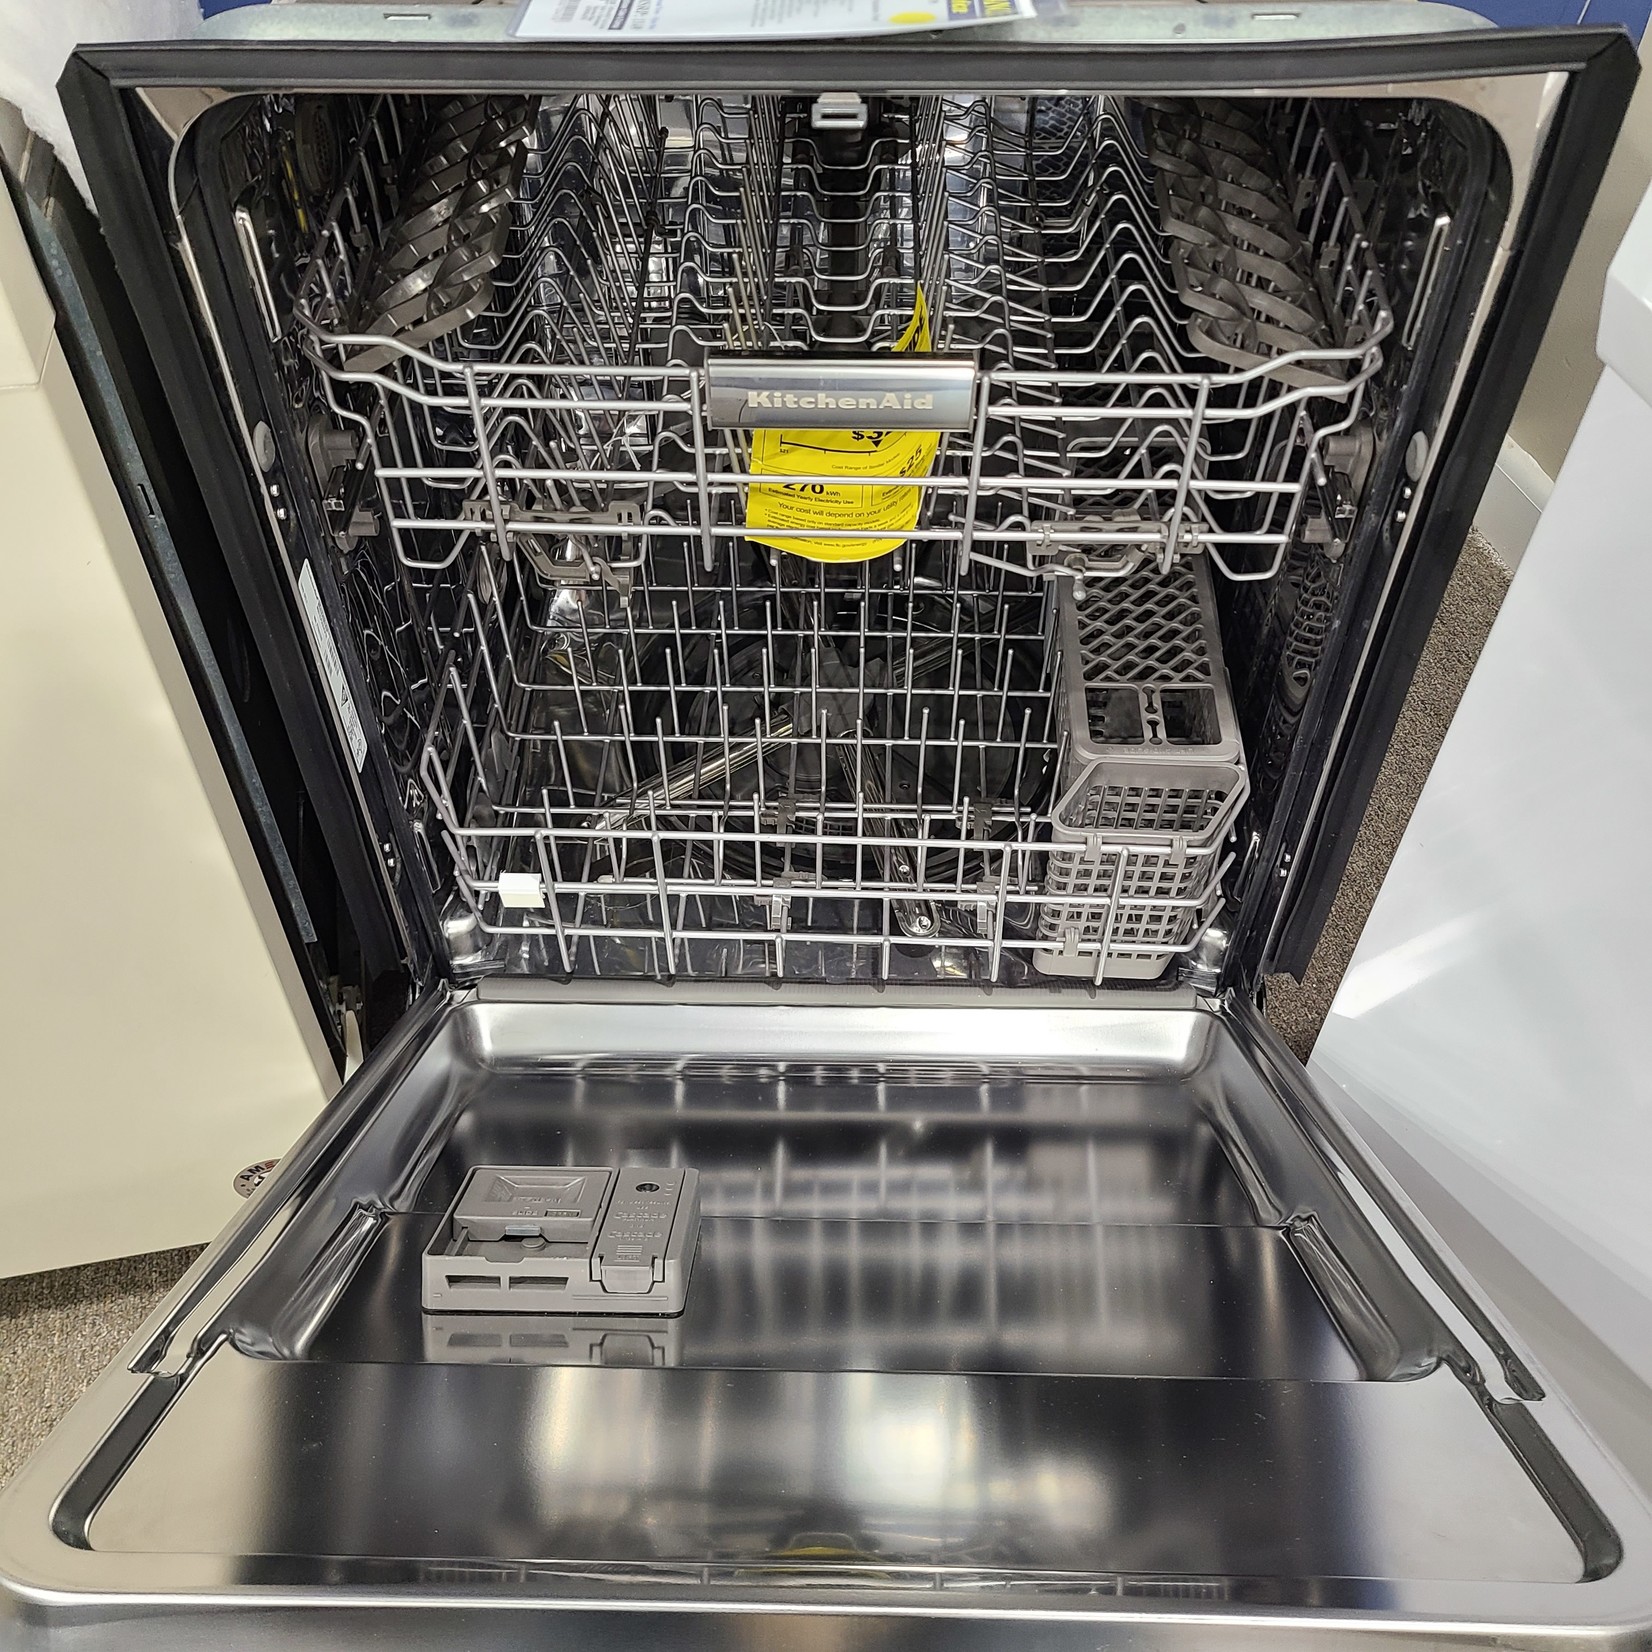 Kitchen Aid KitchenAid Top Control Built In Dishwasher Stainless Steel KDPM354GPS - F73501325; NO CREDIT NEEDED FINANCE OPTIONS!!!